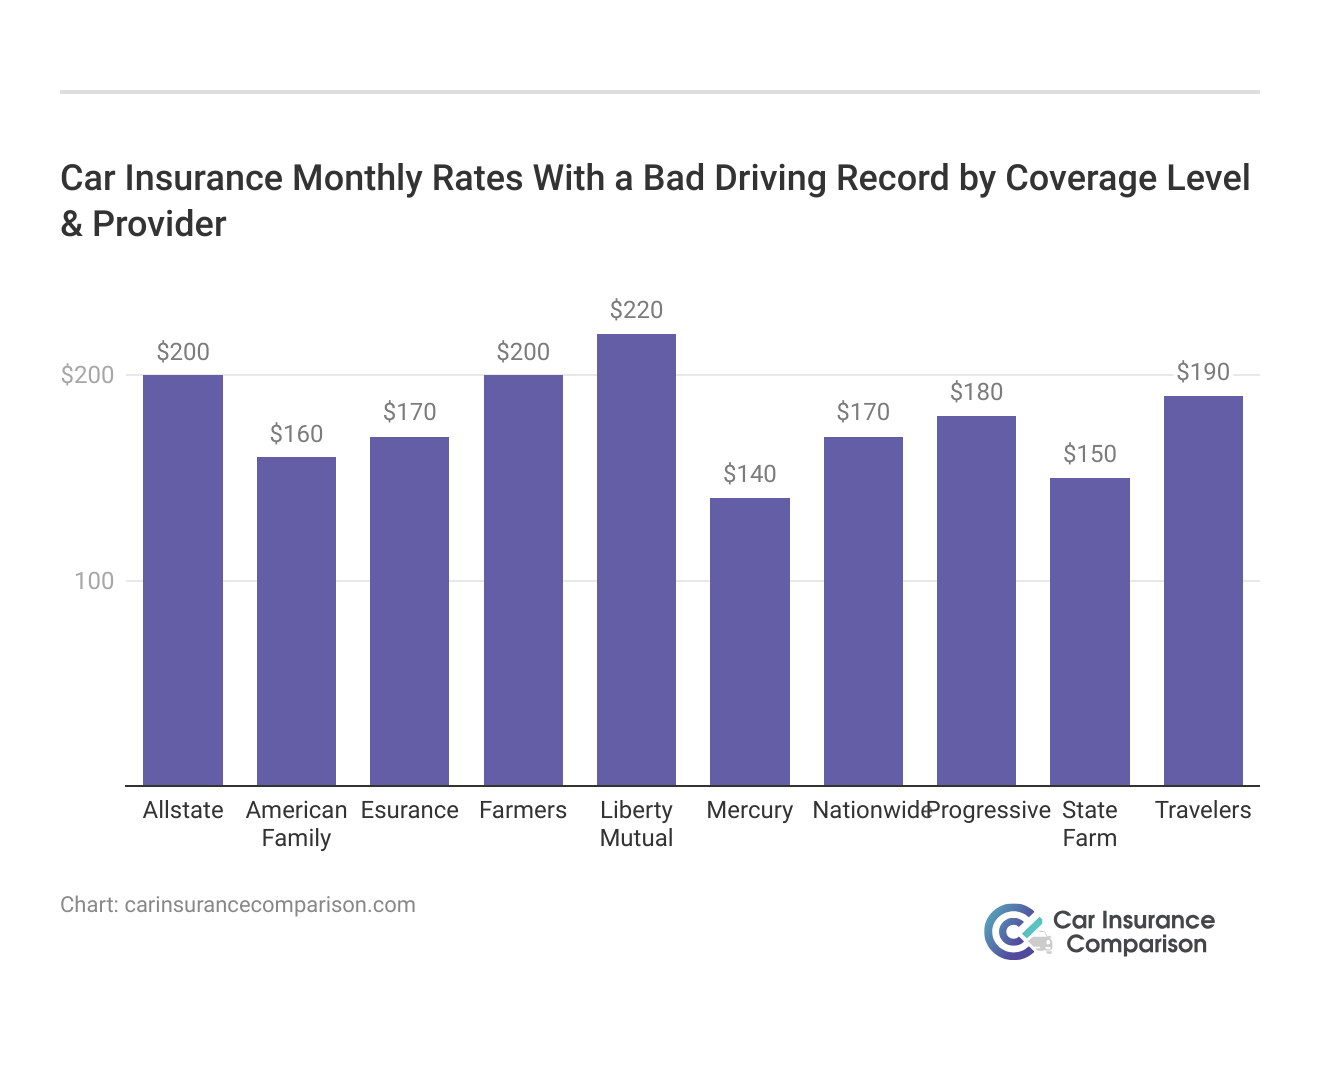 <h3>Car Insurance Monthly Rates With a Bad Driving Record by Coverage Level & Provider</h3>